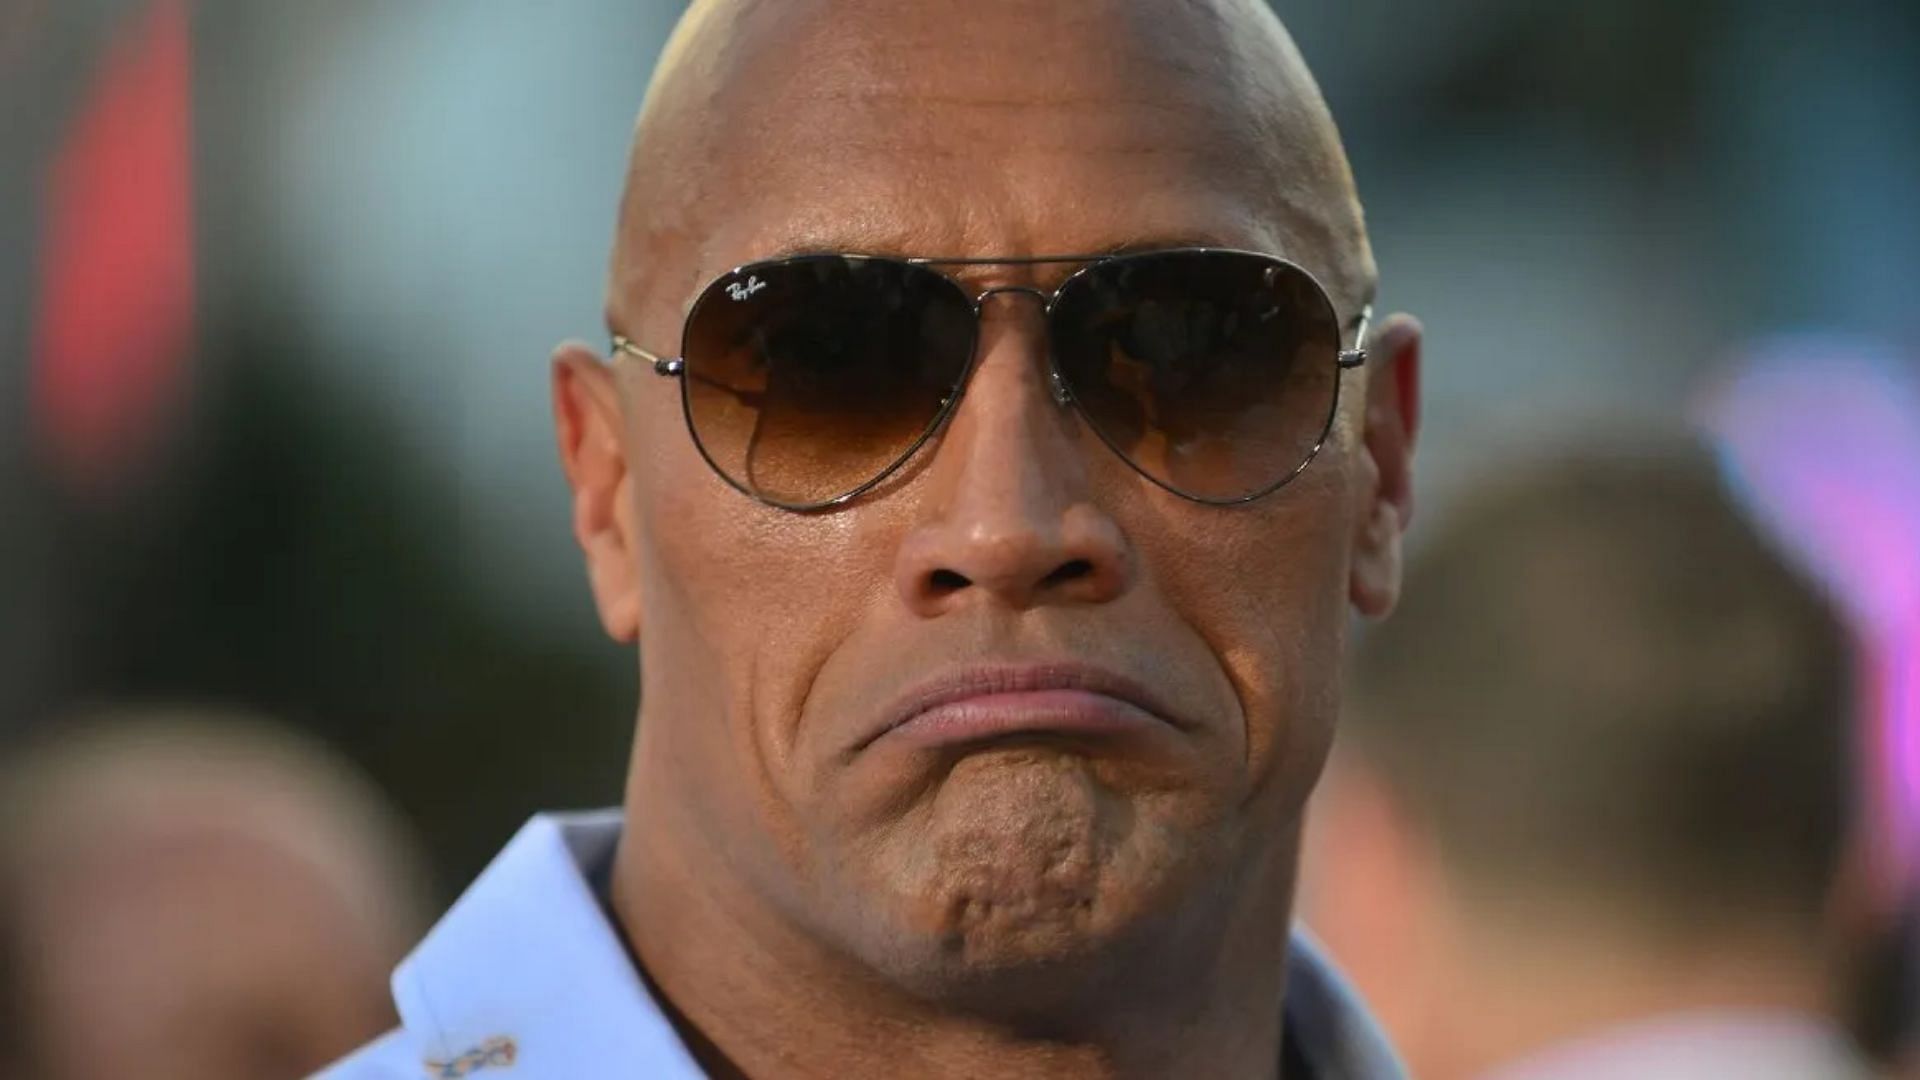 The Rock is clearly getting on some people